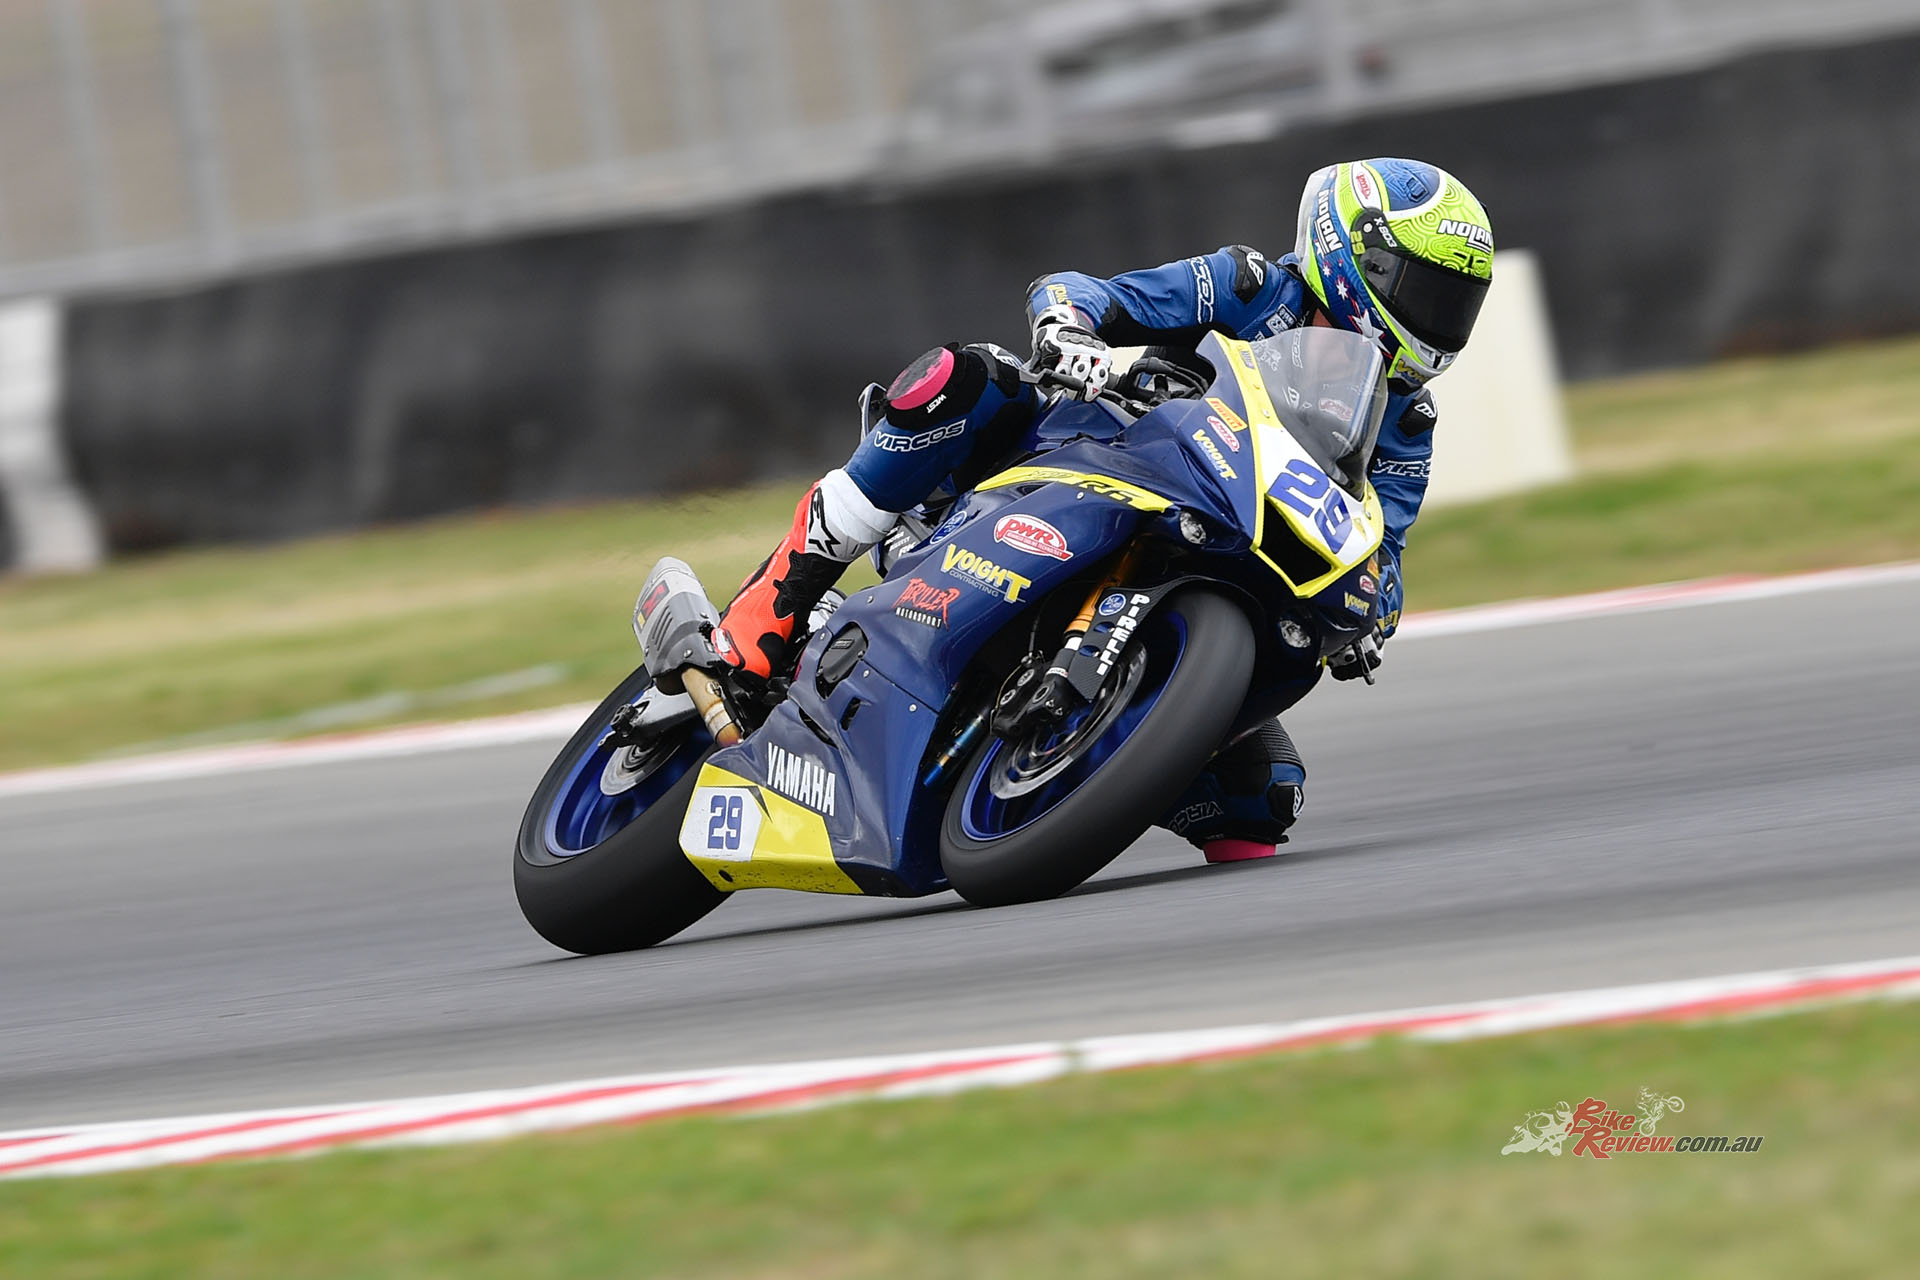 Michelin Supersport is also delicately poised, with returning internationals Harrison Voight and Tom Toparis leading the qualifying charts ahead of the three riders vying for the championship: Olly Simpson, Cameron Dunker and Ty Lynch.